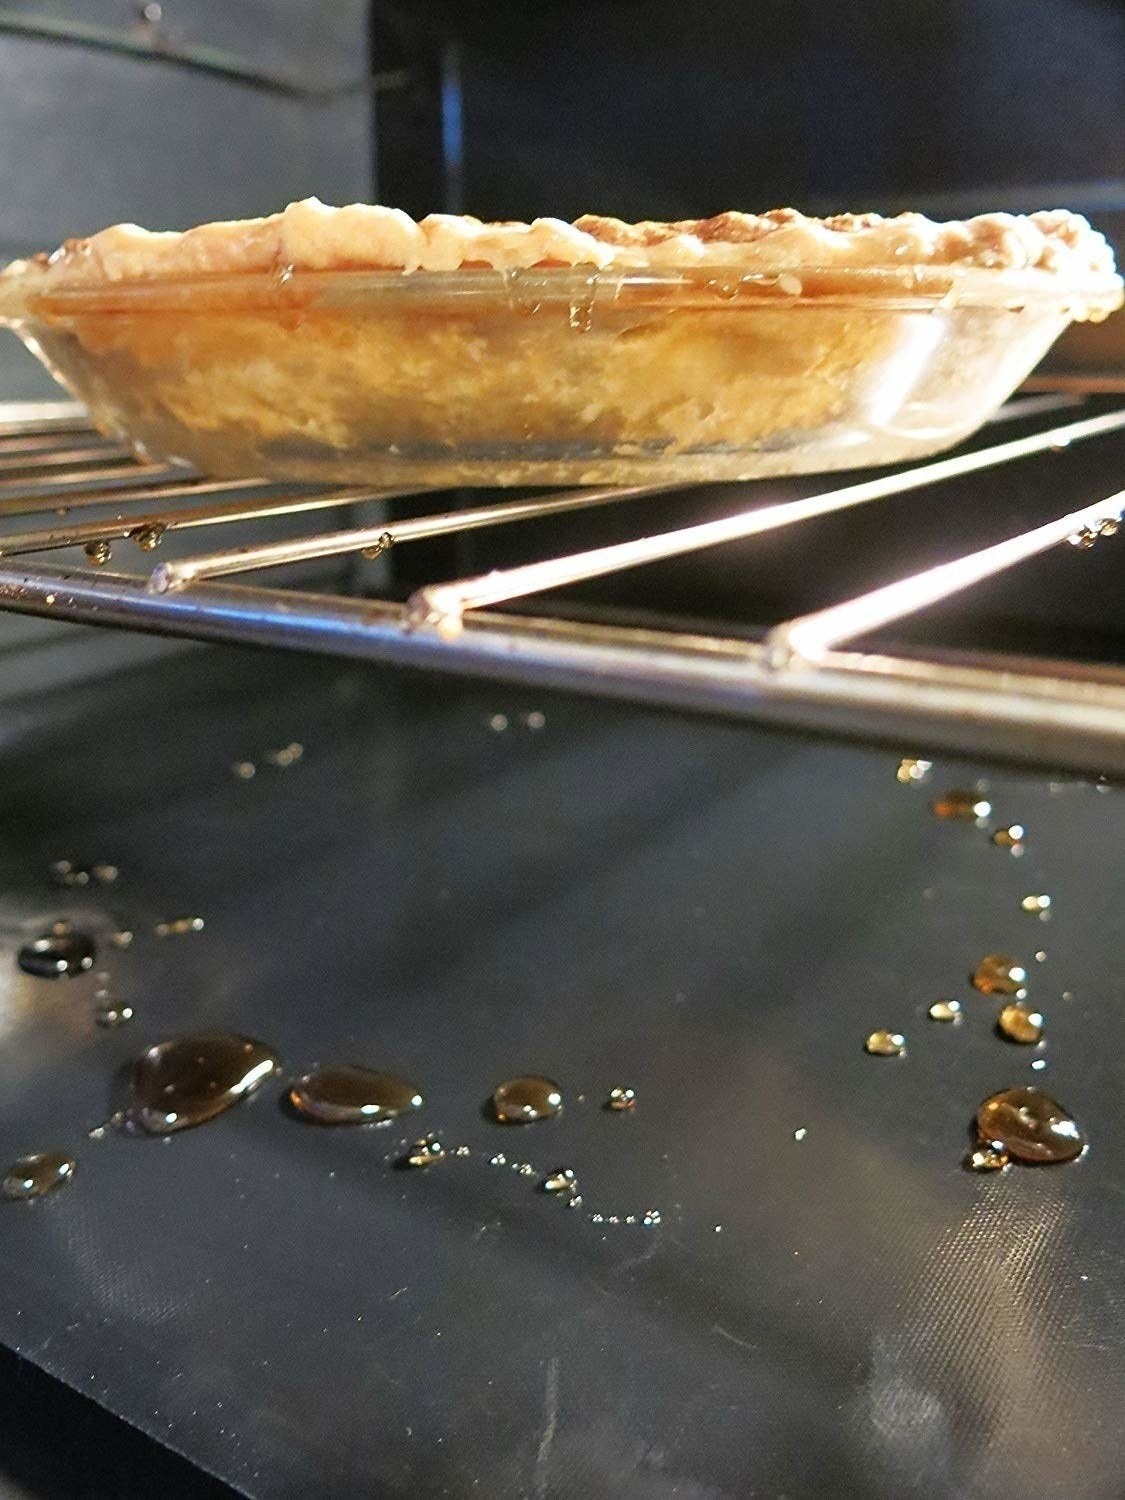 the mat in the bottom of an oven with apple pie drippings on it